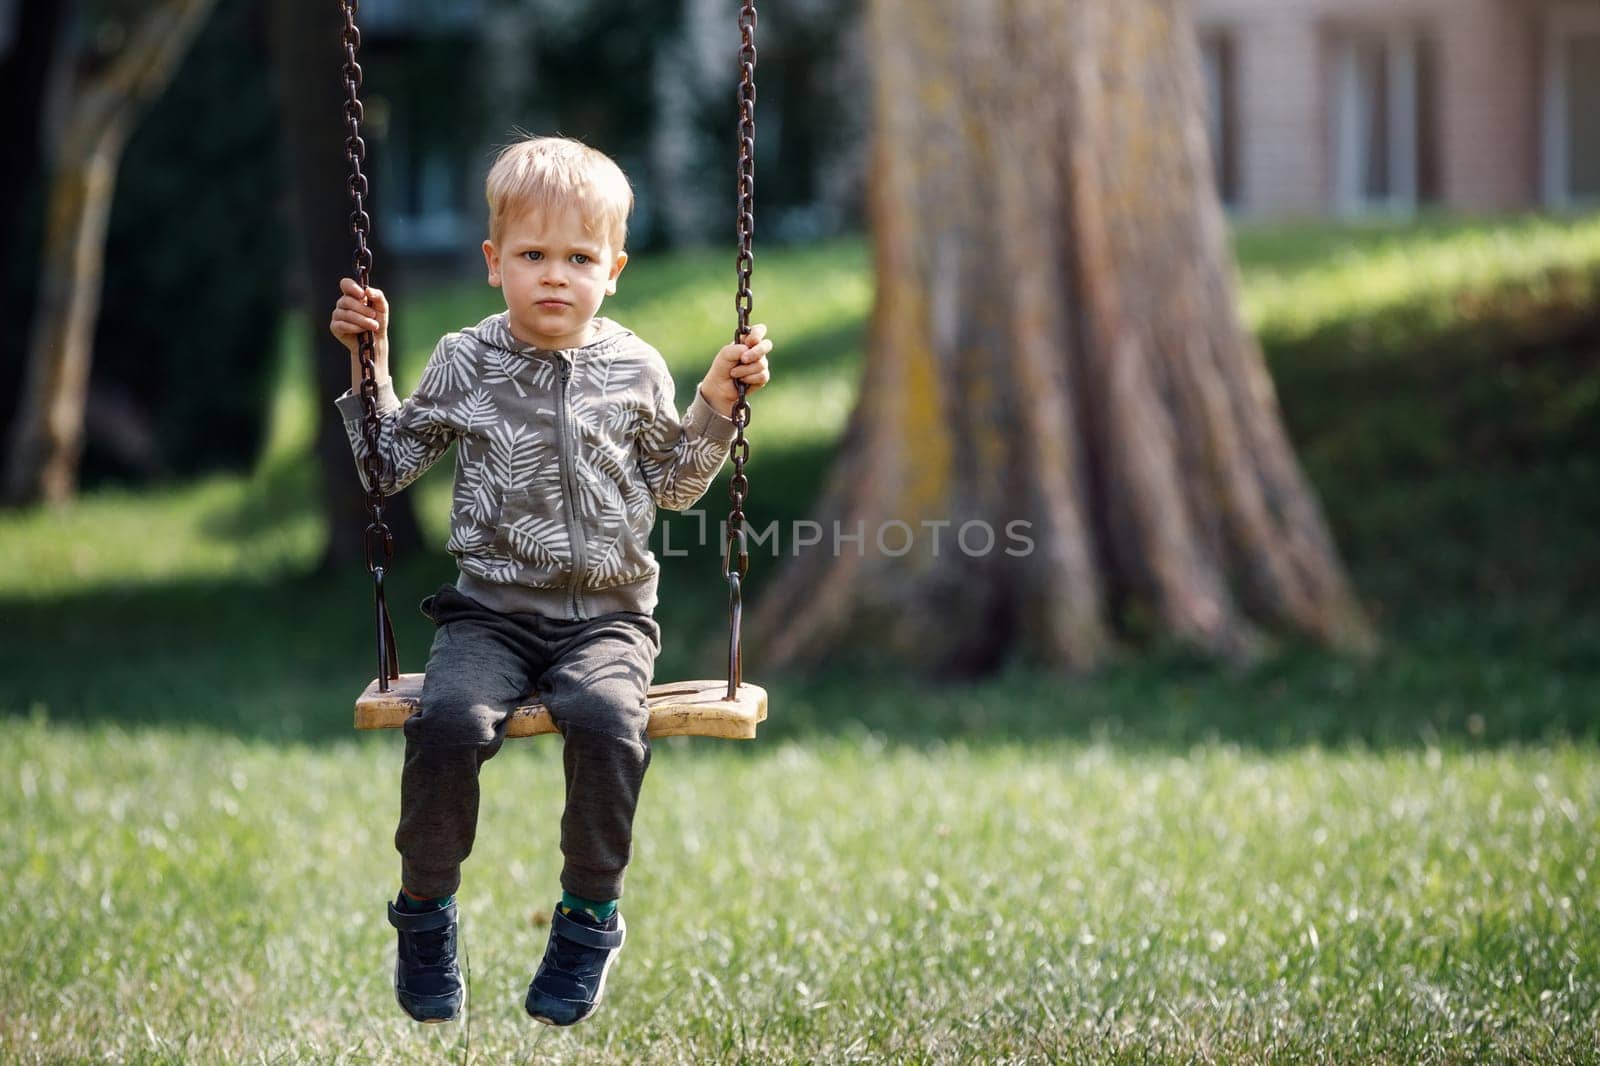 A sad, dreaming little boy swings in a city park under a big tree. Horizontal photo.